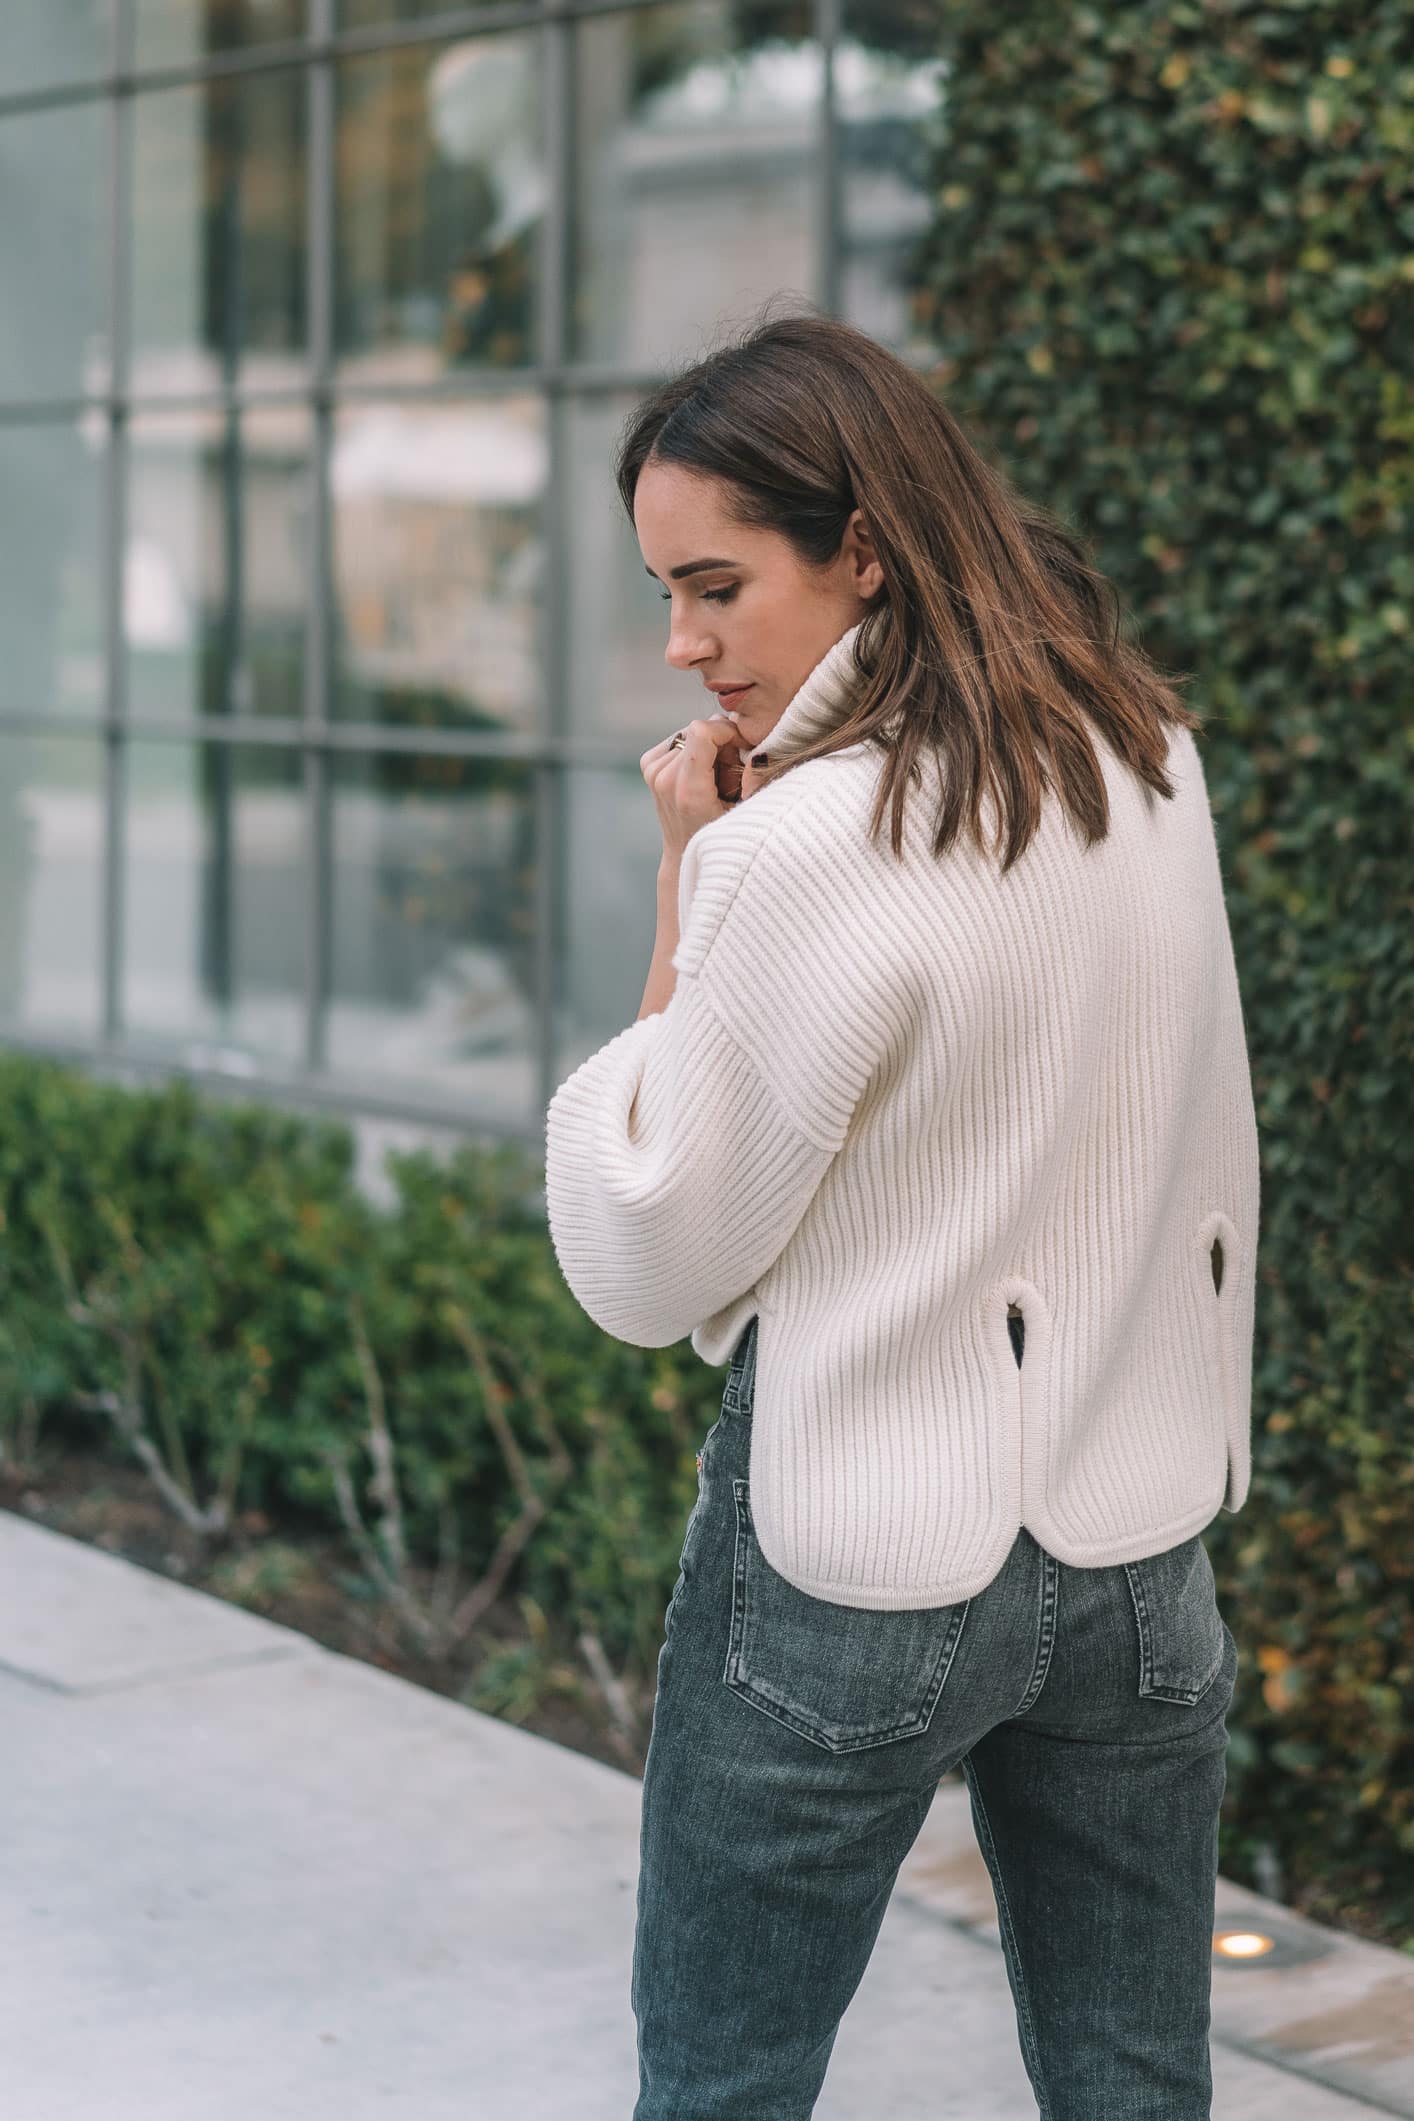 Louise Roe wearing Frame jeans ivory sweater and Jimmy Choo statement heels